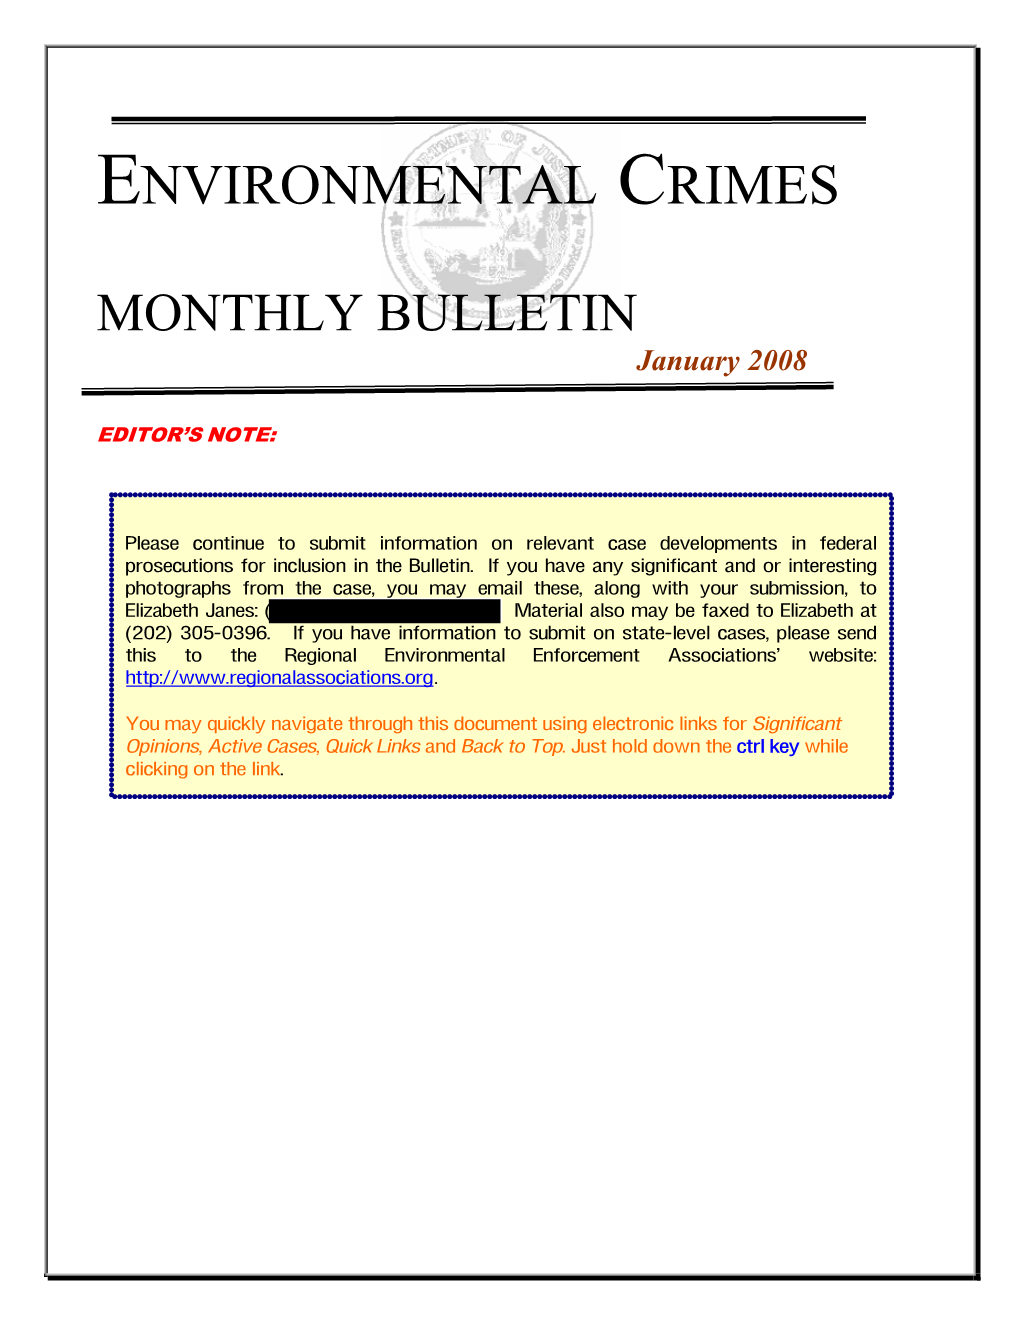 Environmental Crimes Monthly Bulletin by Email To